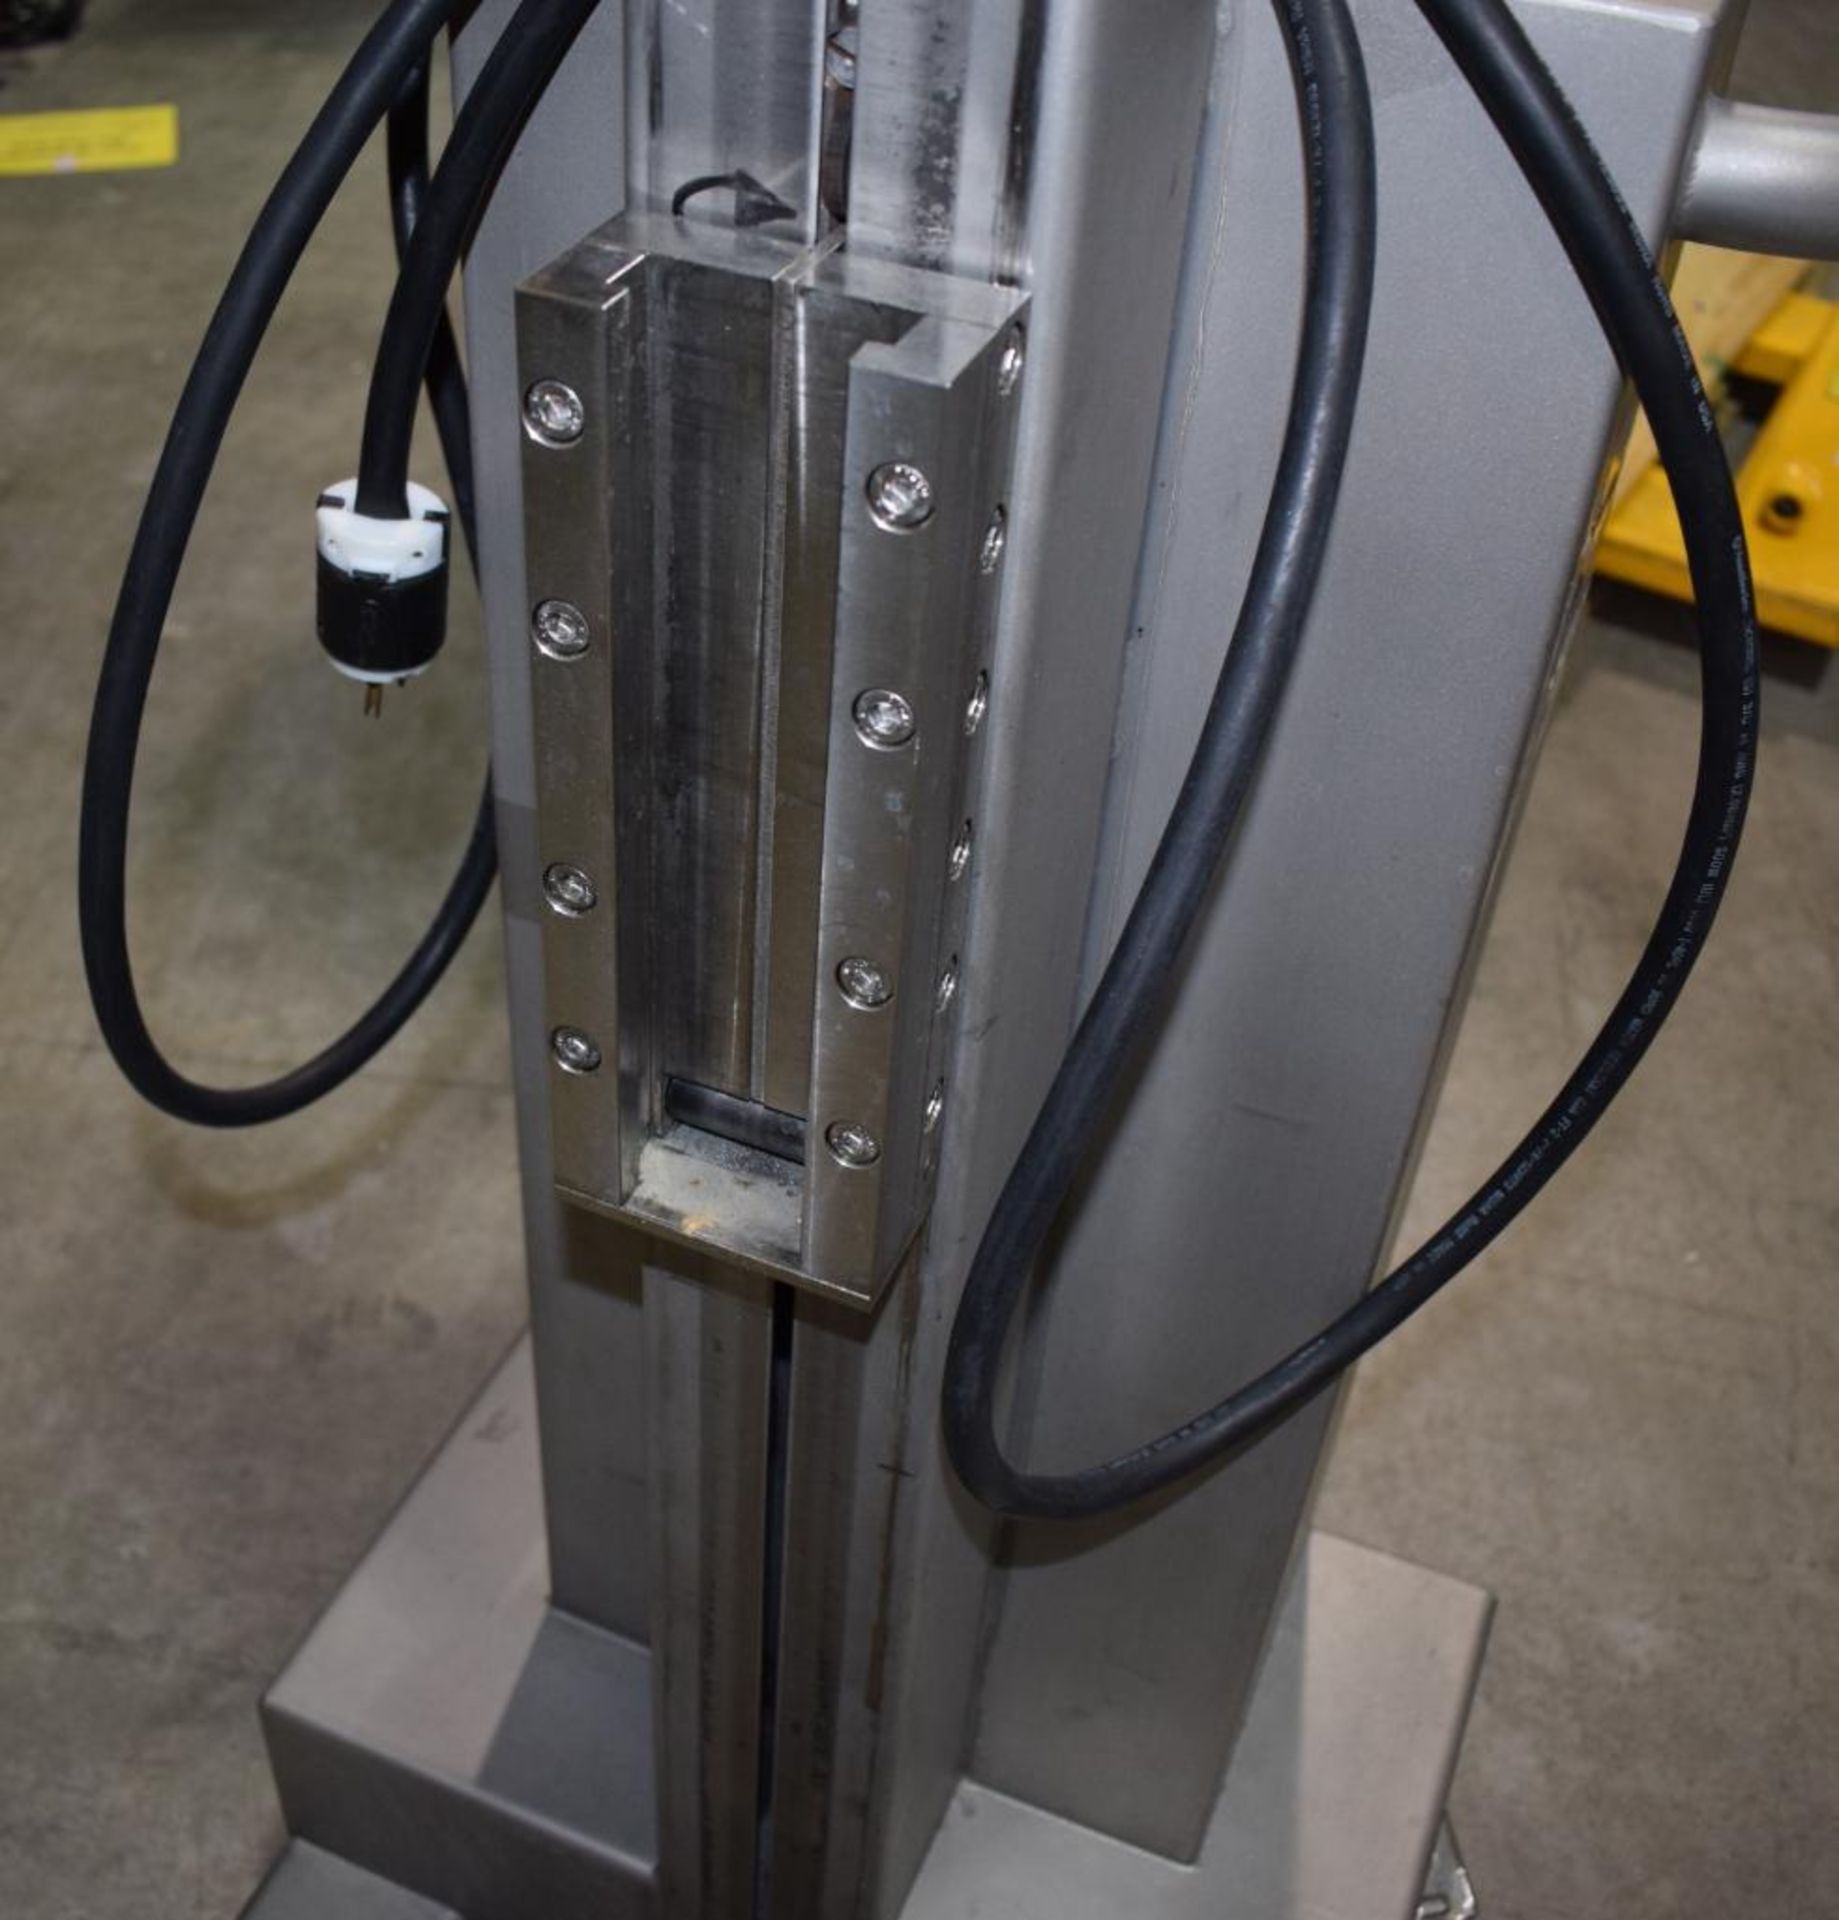 Packline Compac Platform Attachment Stainless Steel Portable Lift. Approximate capacity 275 Pounds. - Image 4 of 6